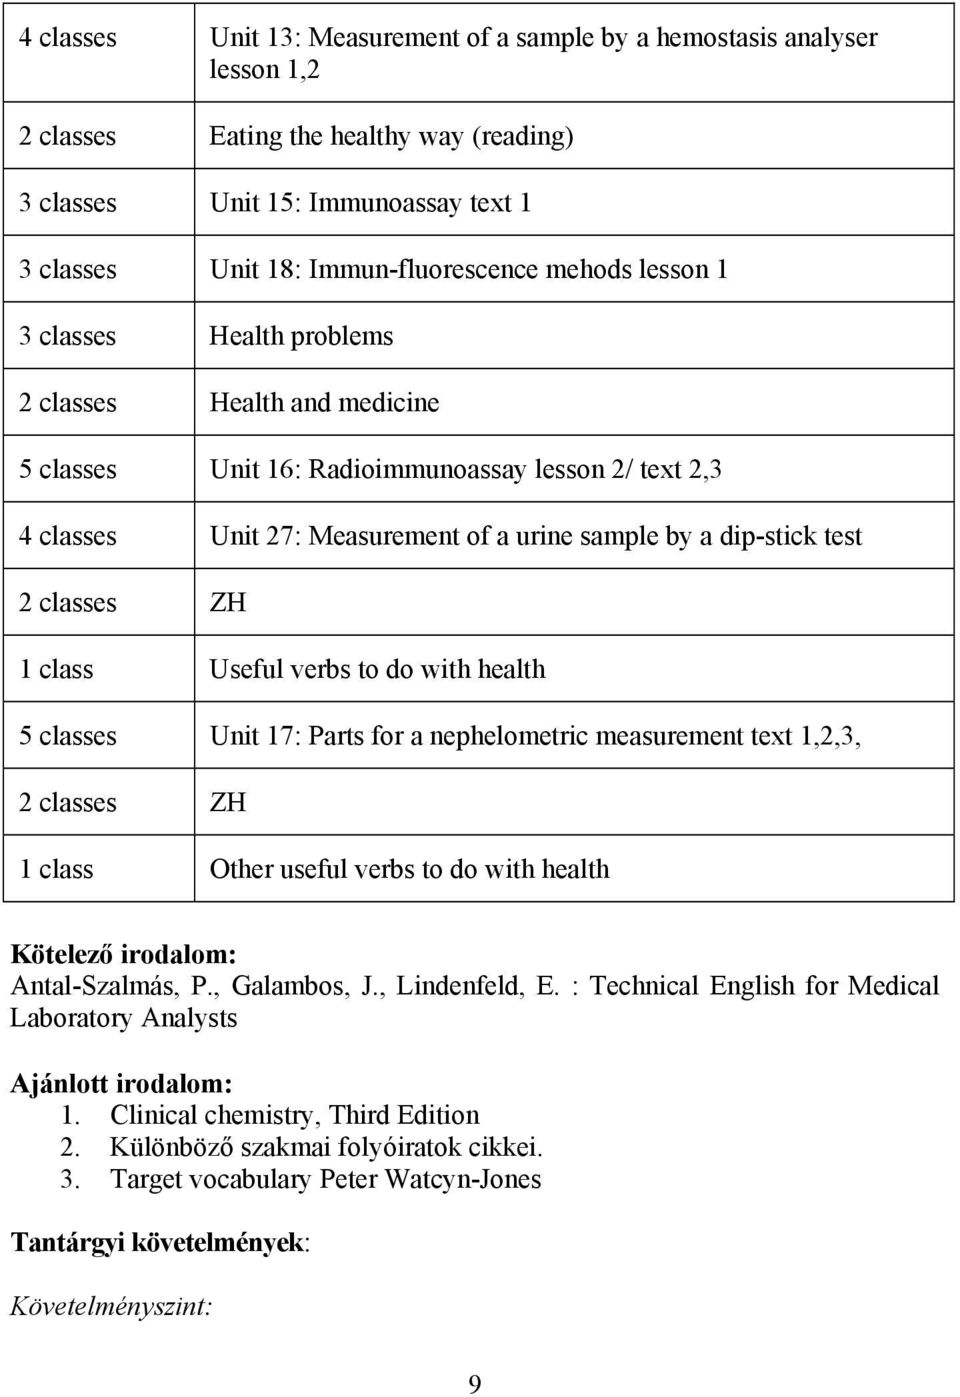 classes ZH 1 class Useful verbs to do with health 5 classes Unit 17: Parts for a nephelometric measurement text 1,2,3, 2 classes ZH 1 class Other useful verbs to do with health Kötelező irodalom: